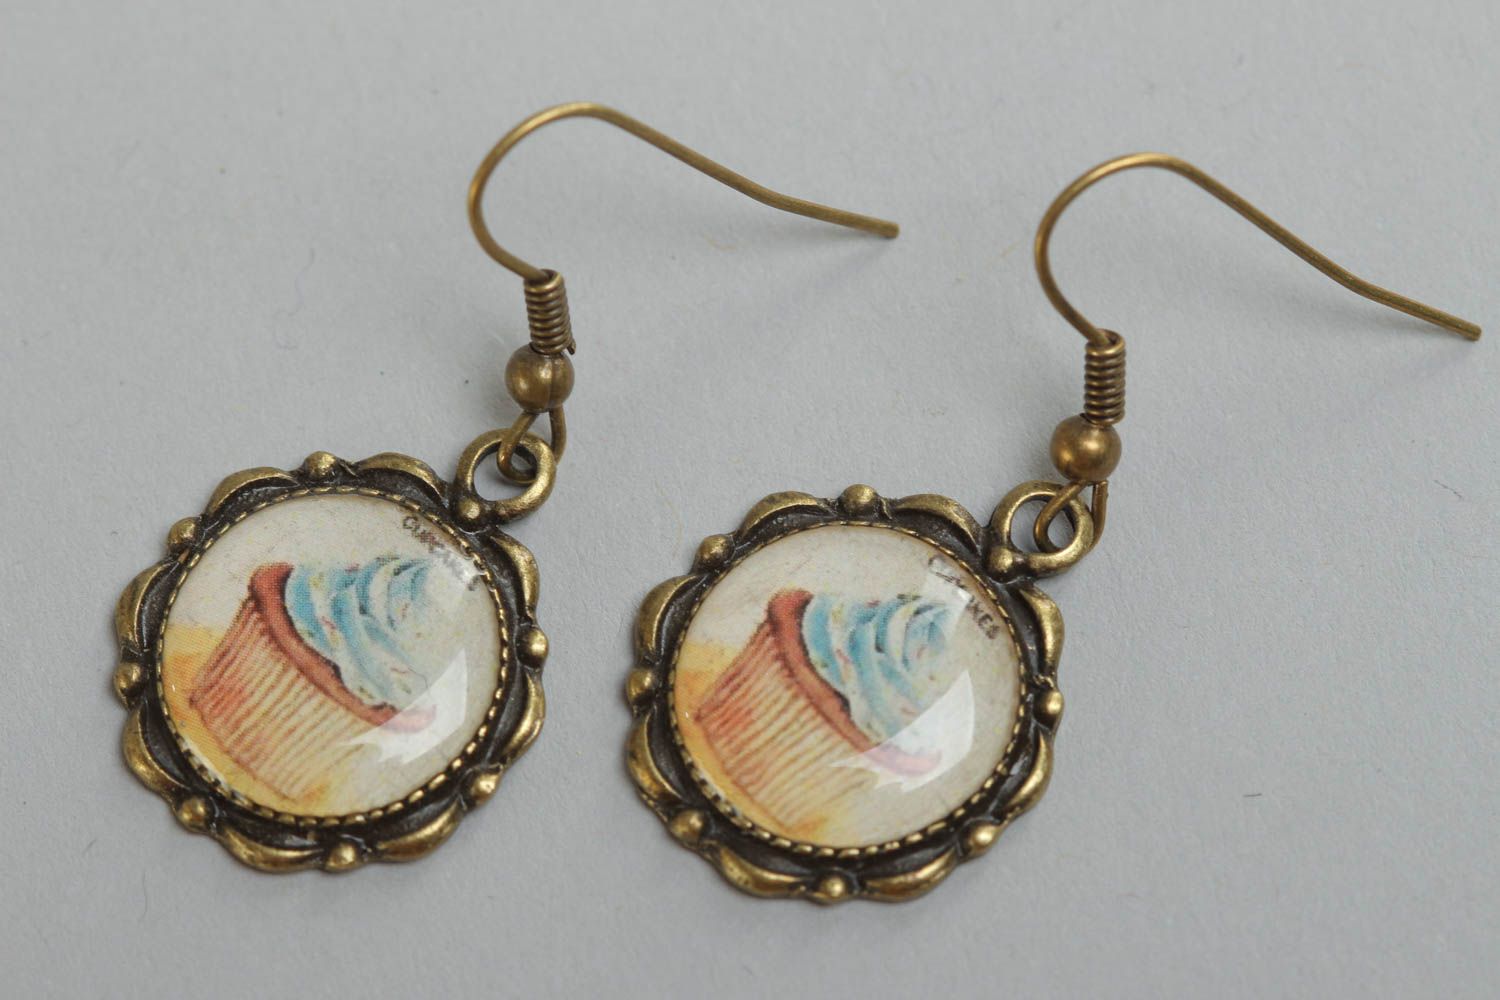 Handmade round earrings with metal basis and imagery of cakes coated with glass photo 2